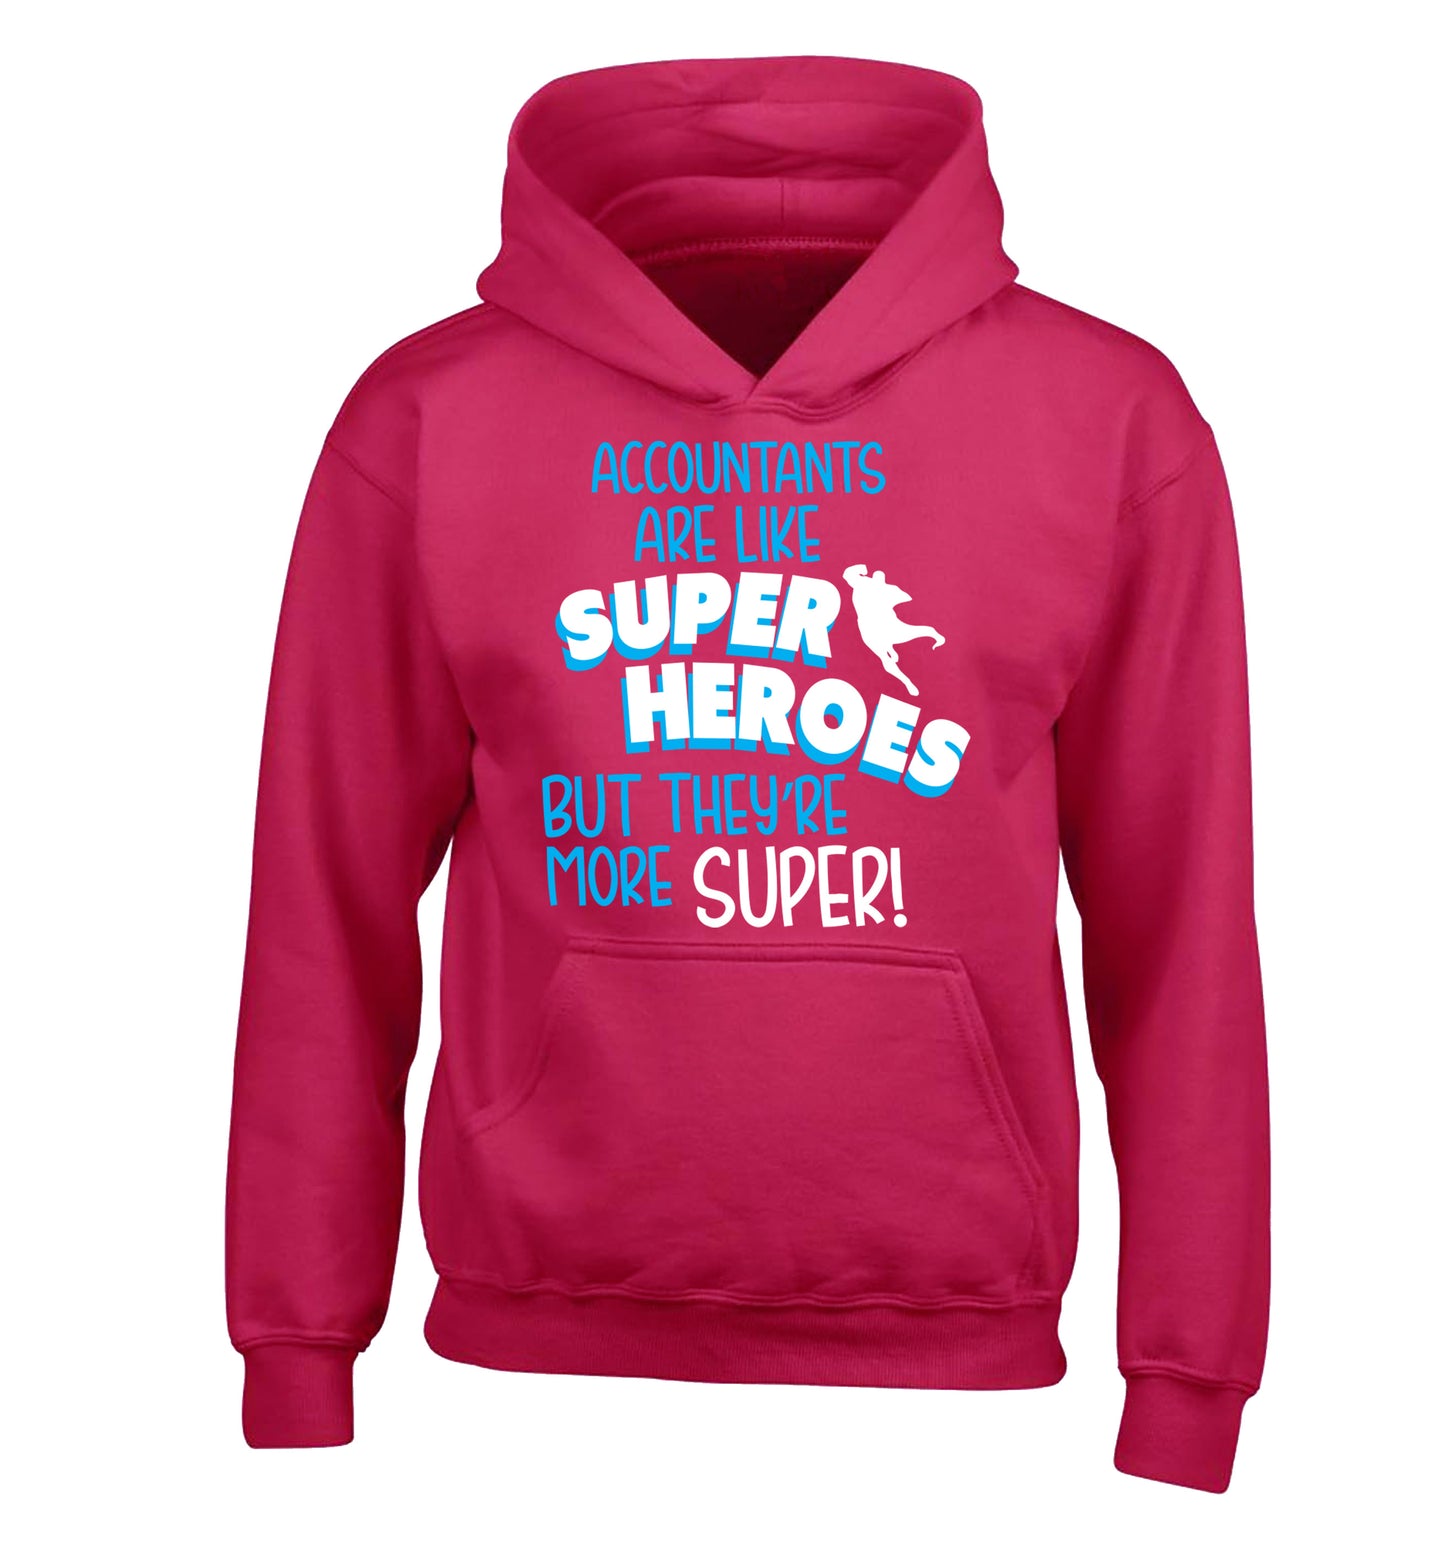 Accountants are like superheroes but they're more super children's pink hoodie 12-13 Years